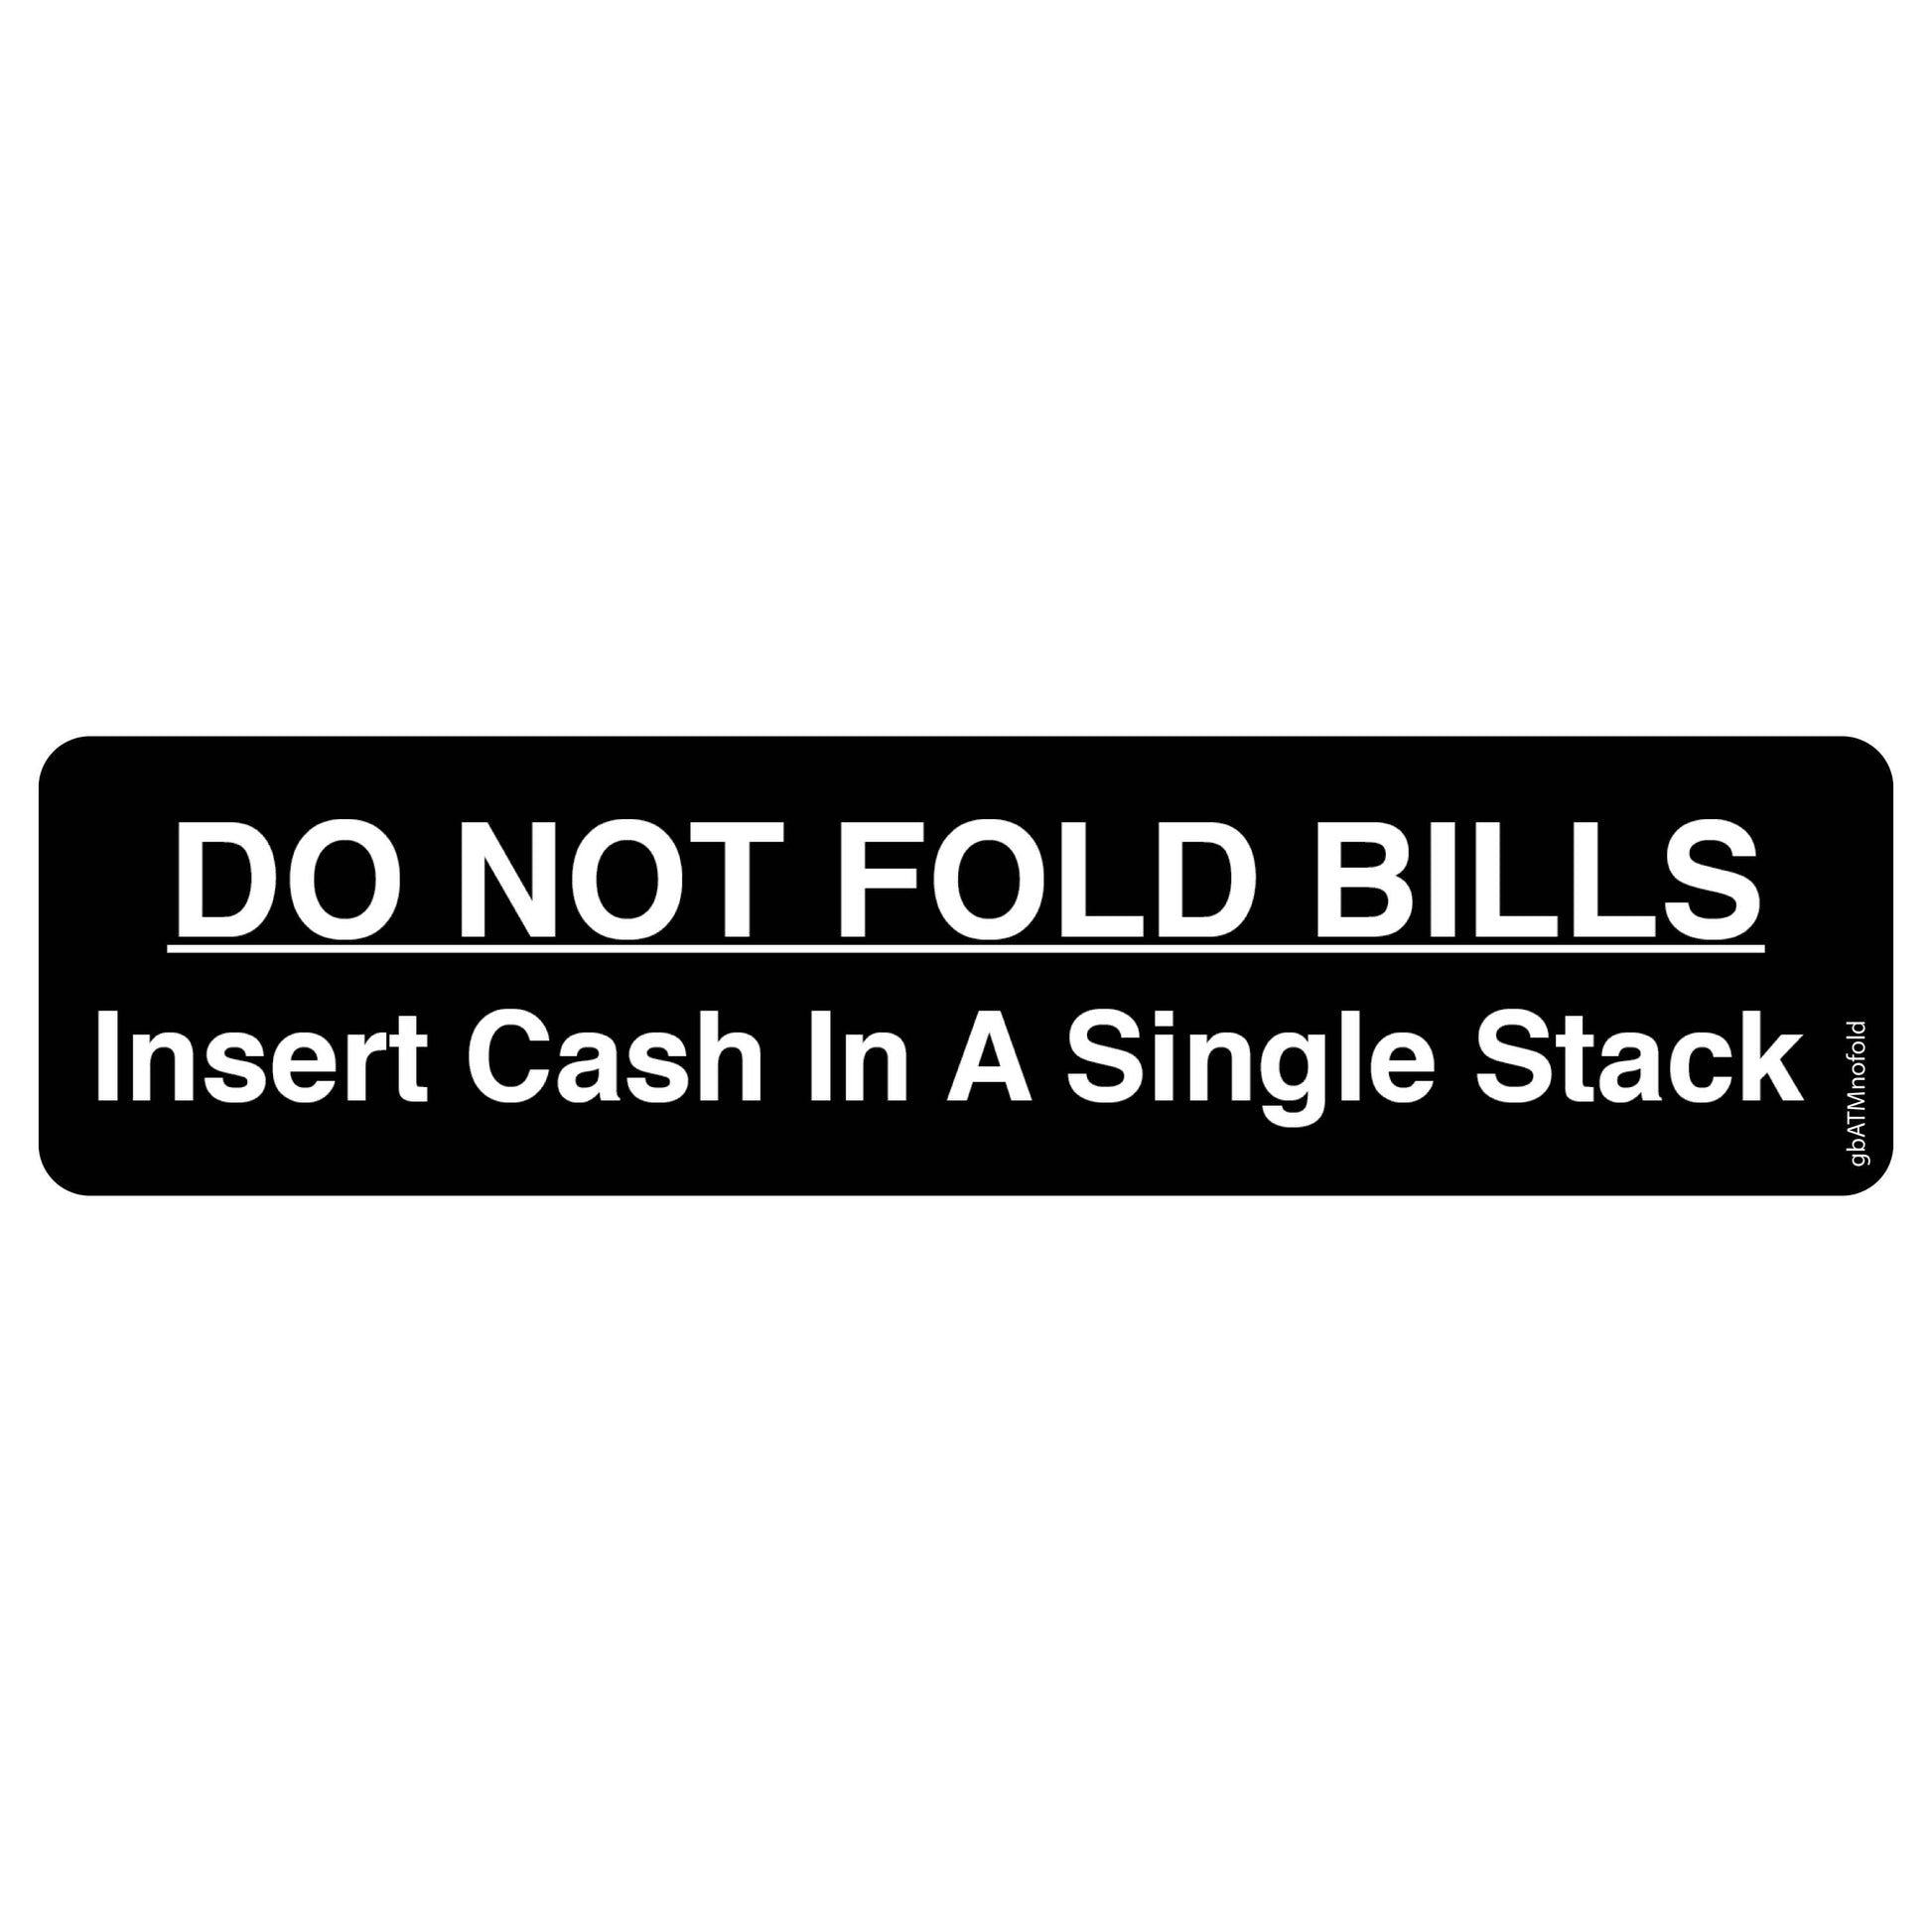 Do Not Fold Bills Decal. 6 inches by 1.5 inches in size. 